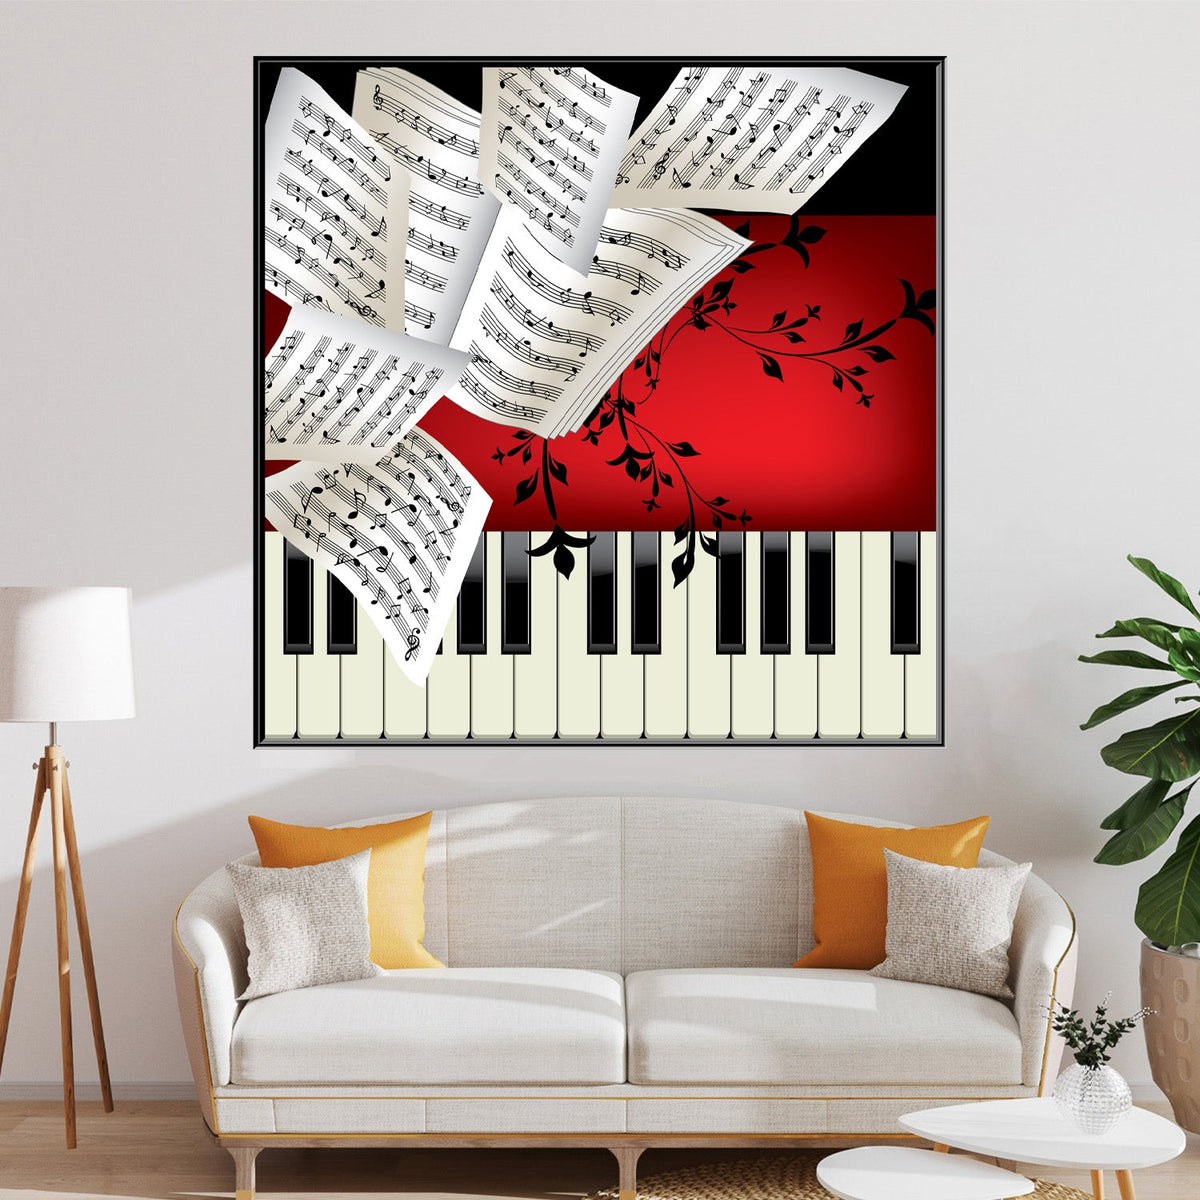 https://cdn.shopify.com/s/files/1/0387/9986/8044/products/MusicalNotesOnPianoCanvasArtprintFloatingFrame-1.jpg